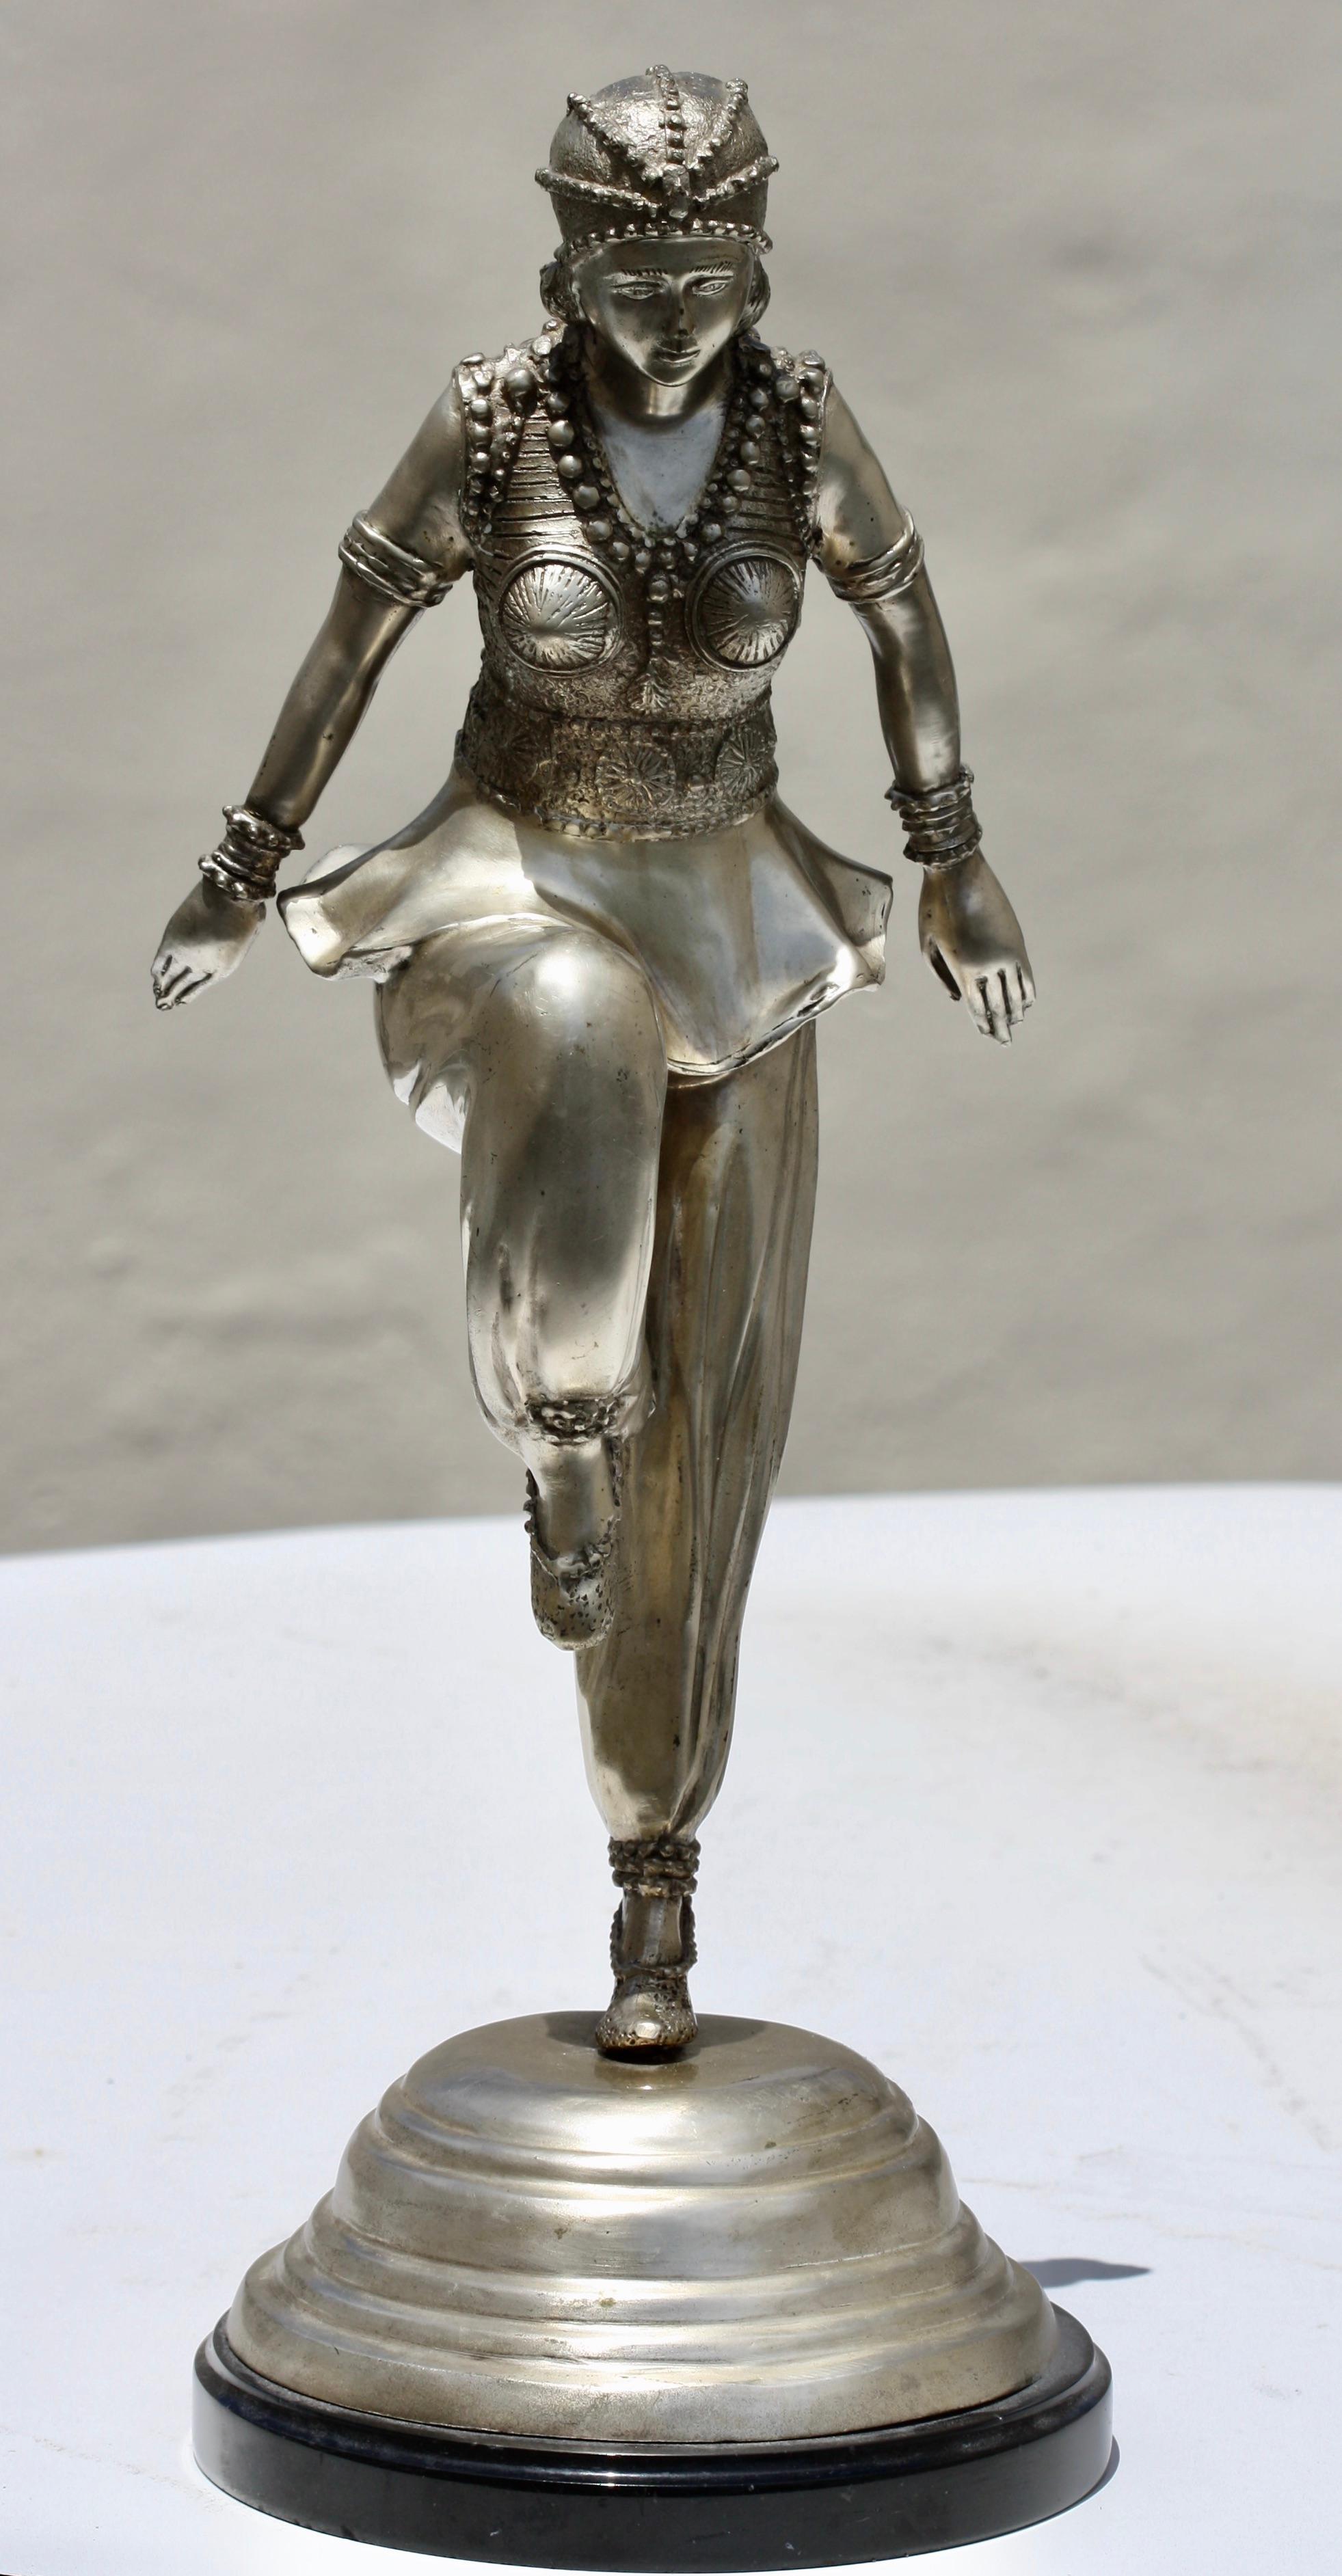 After Claire Colinet (1880-1950)
A silvered bronze dancer after a model by Claire Colinet (1880-1950)
modelled with her arms outstretched behind her, on a black marble plinth
20th Century
21 inches high
8 inch round base.